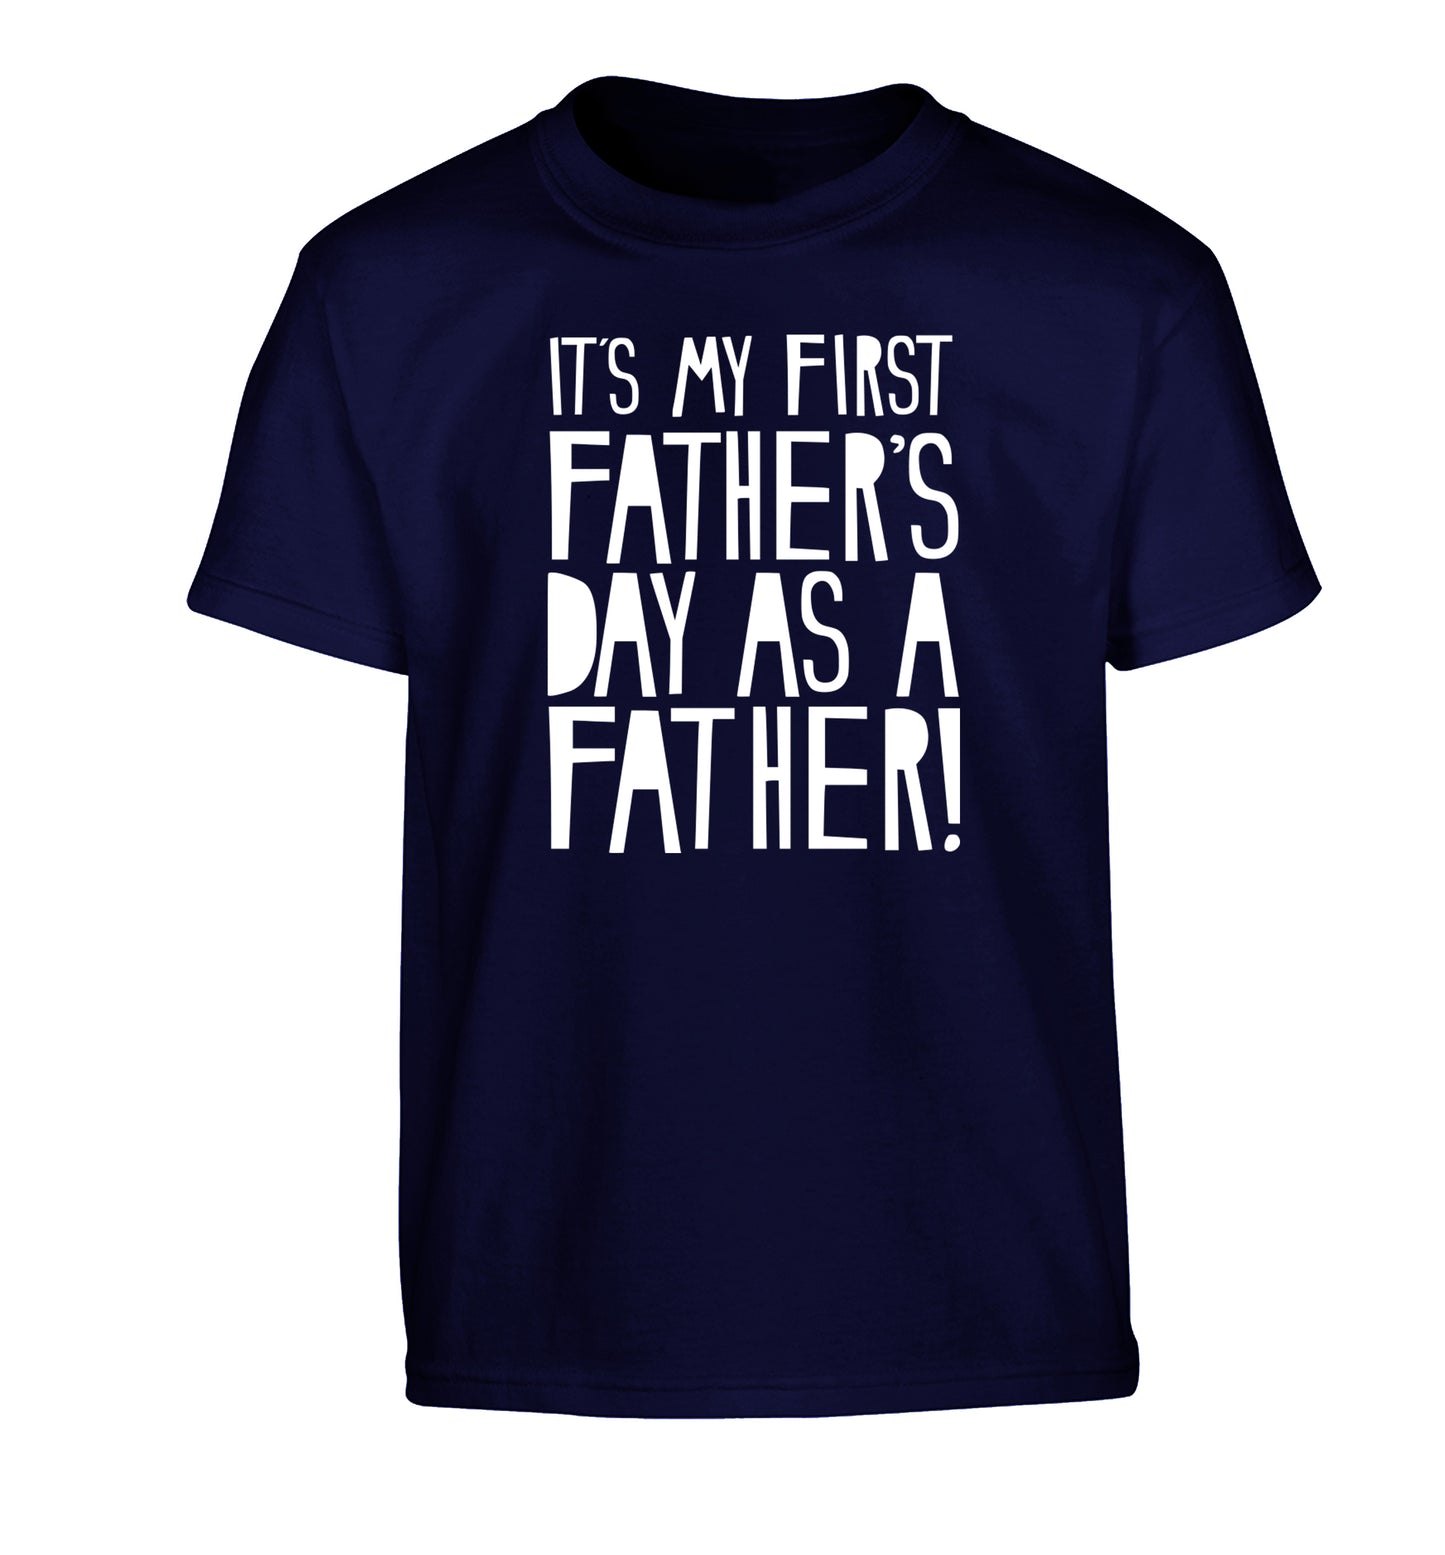 It's my first Father's Day as a father! Children's navy Tshirt 12-13 Years